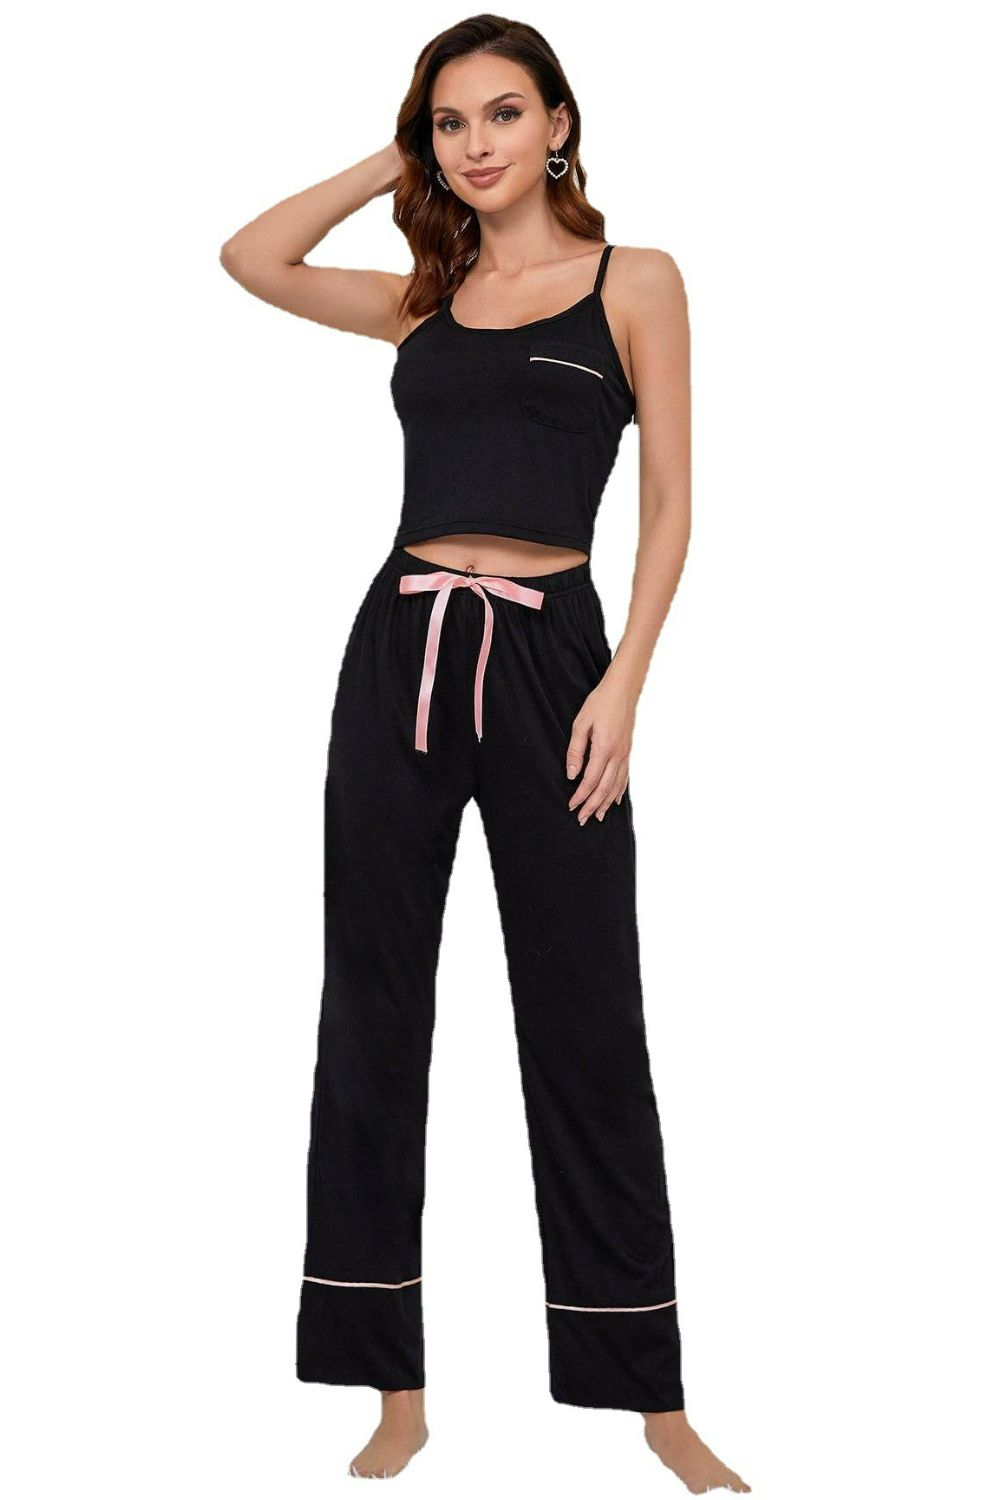 Classy Comfy Cropped Cami Loungewear Outfit